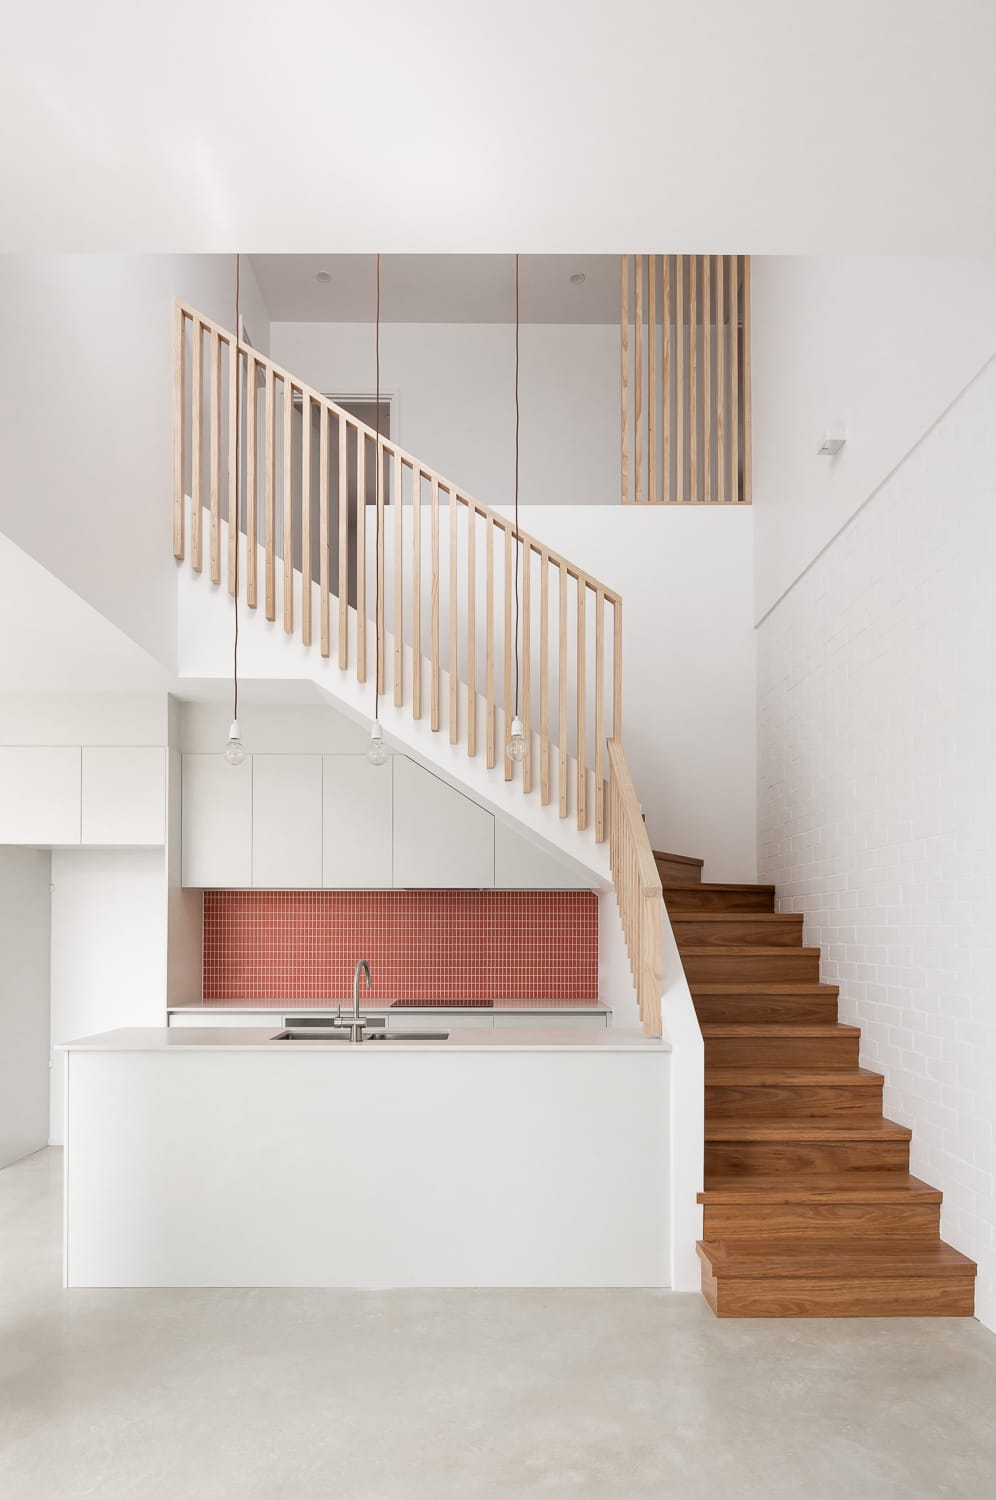 Carrington Street Terraces by MDC Architects.he focus here is on a modern staircase with a minimalist aesthetic. Wooden steps ascend from a white base, leading up to a second level. A simple wooden balustrade lines the staircase, and the walls are white, enhancing the clean, bright feel of the space. In the background, a kitchen area with a red-tiled backsplash is partially visible below the stairs.